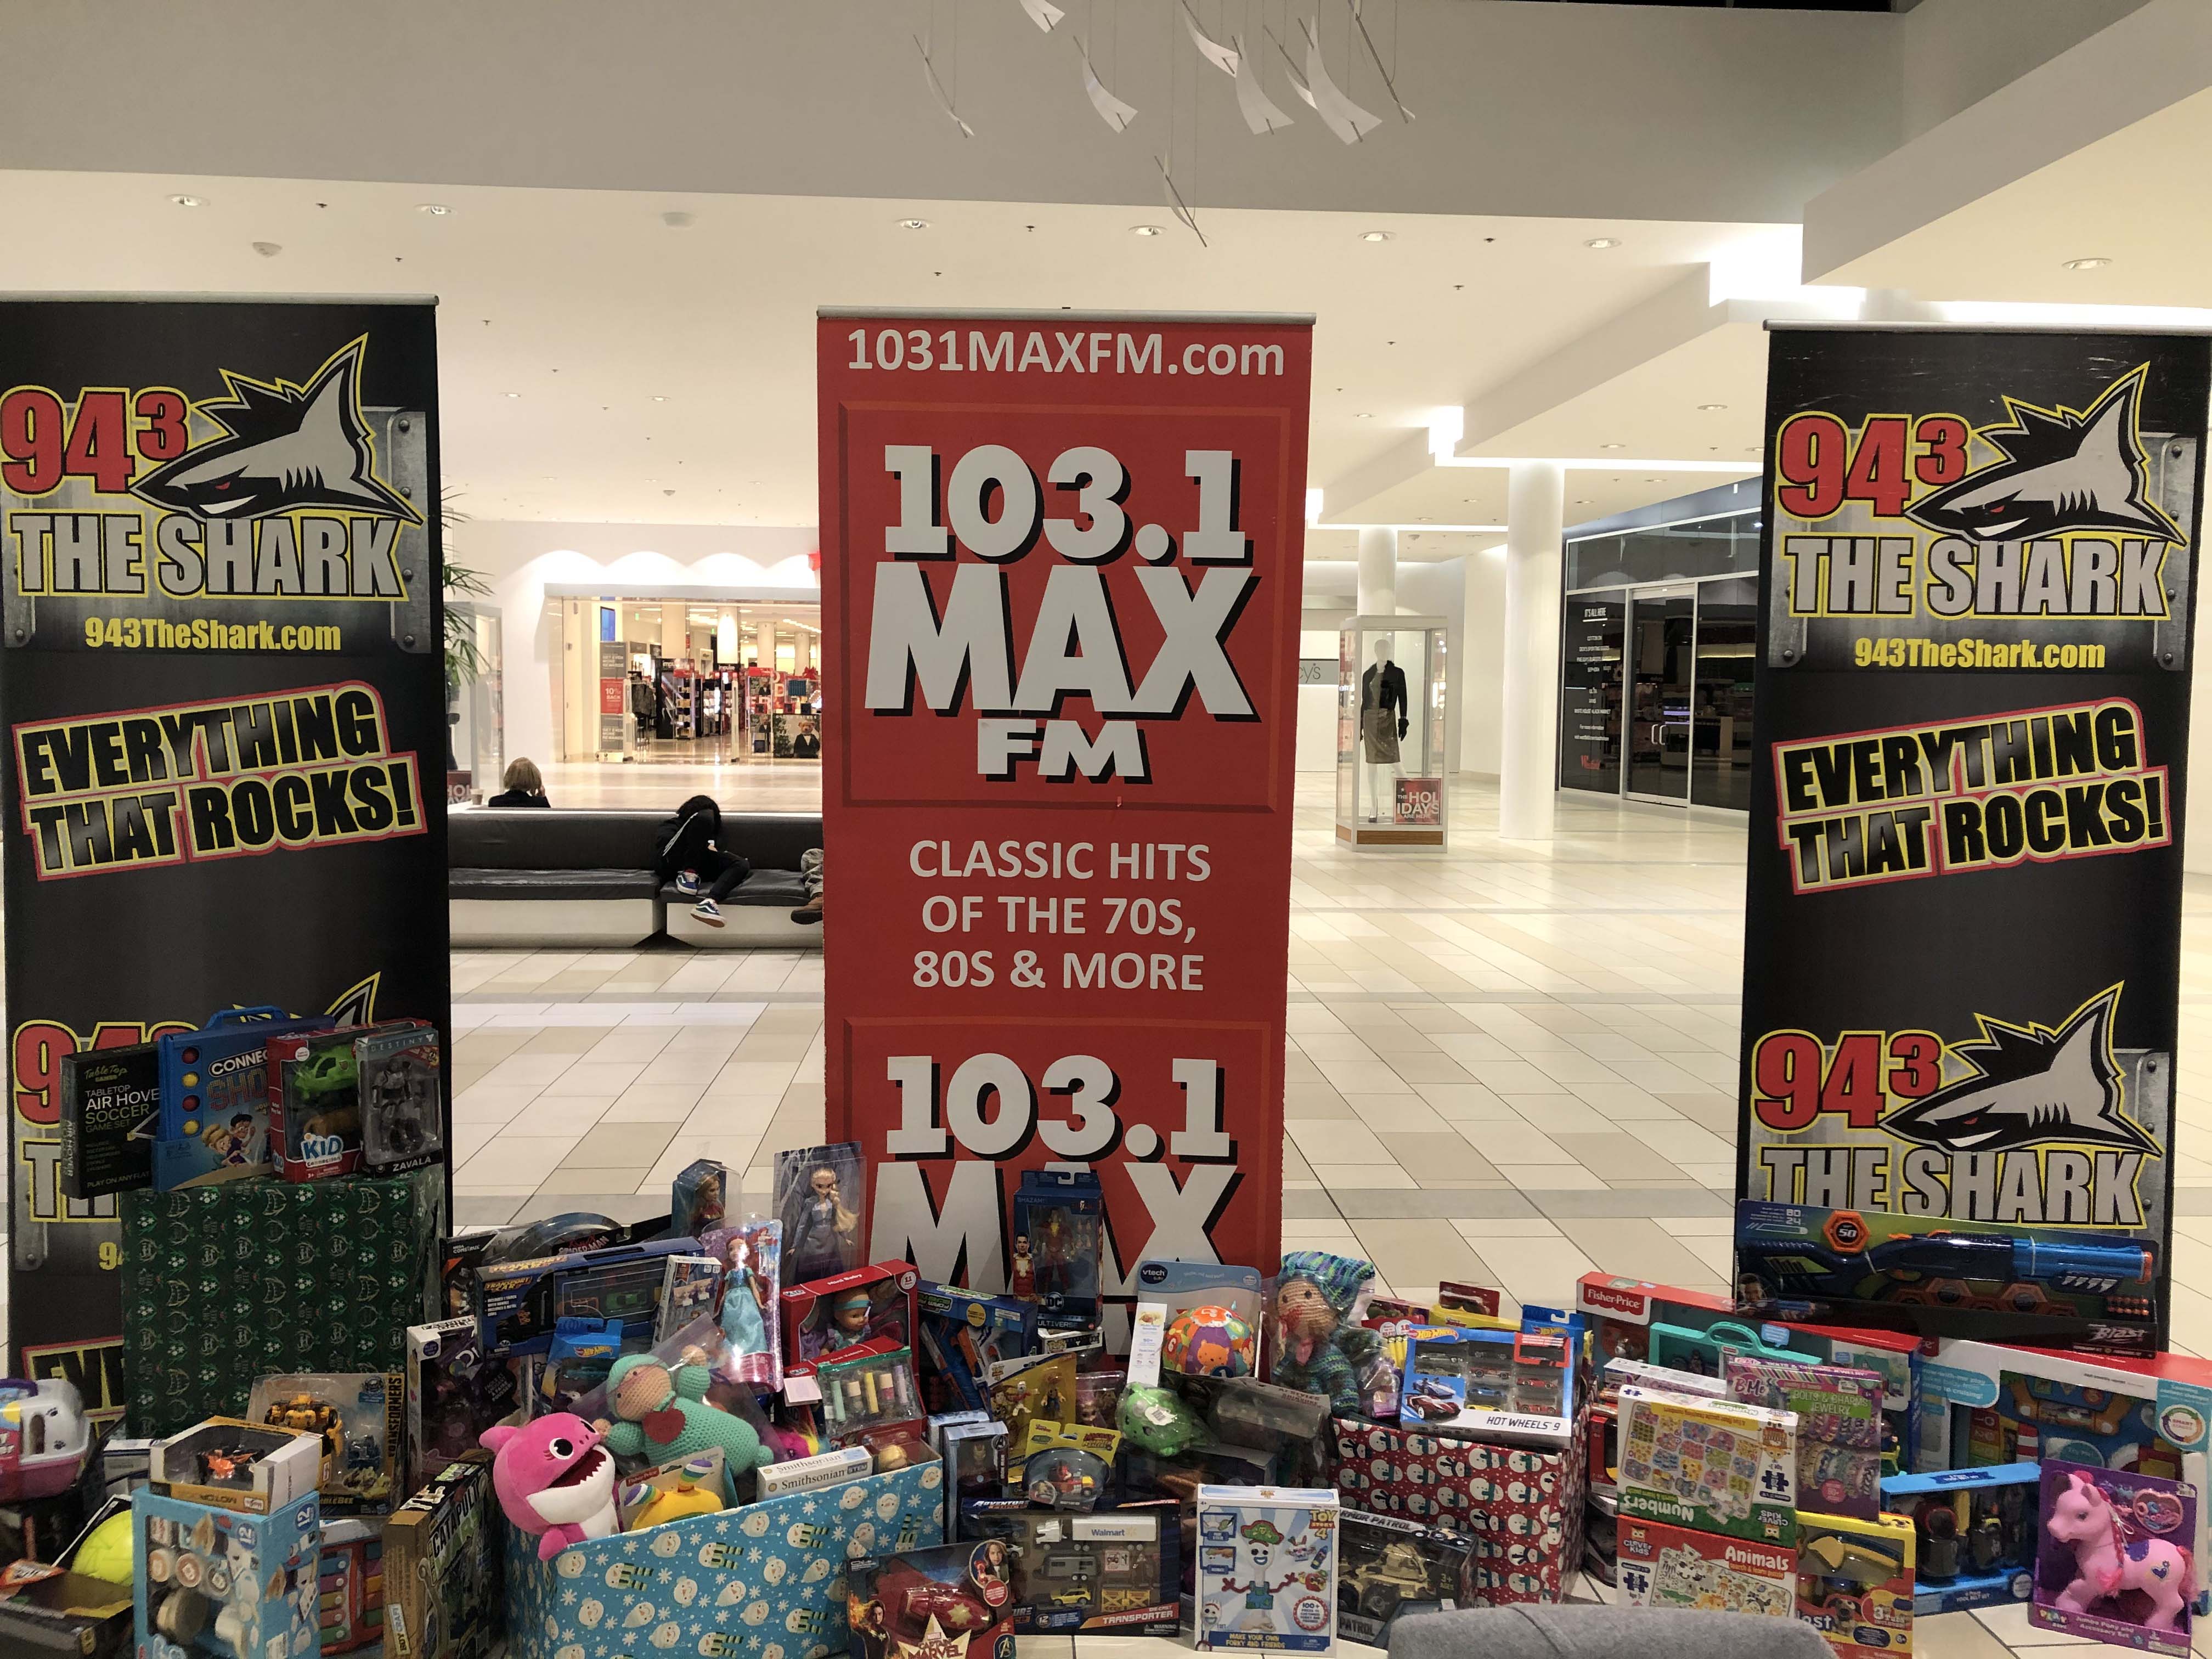 103.1 MAX FM and 94.3 The Shark’s Toy Drive benefiting Family Service League